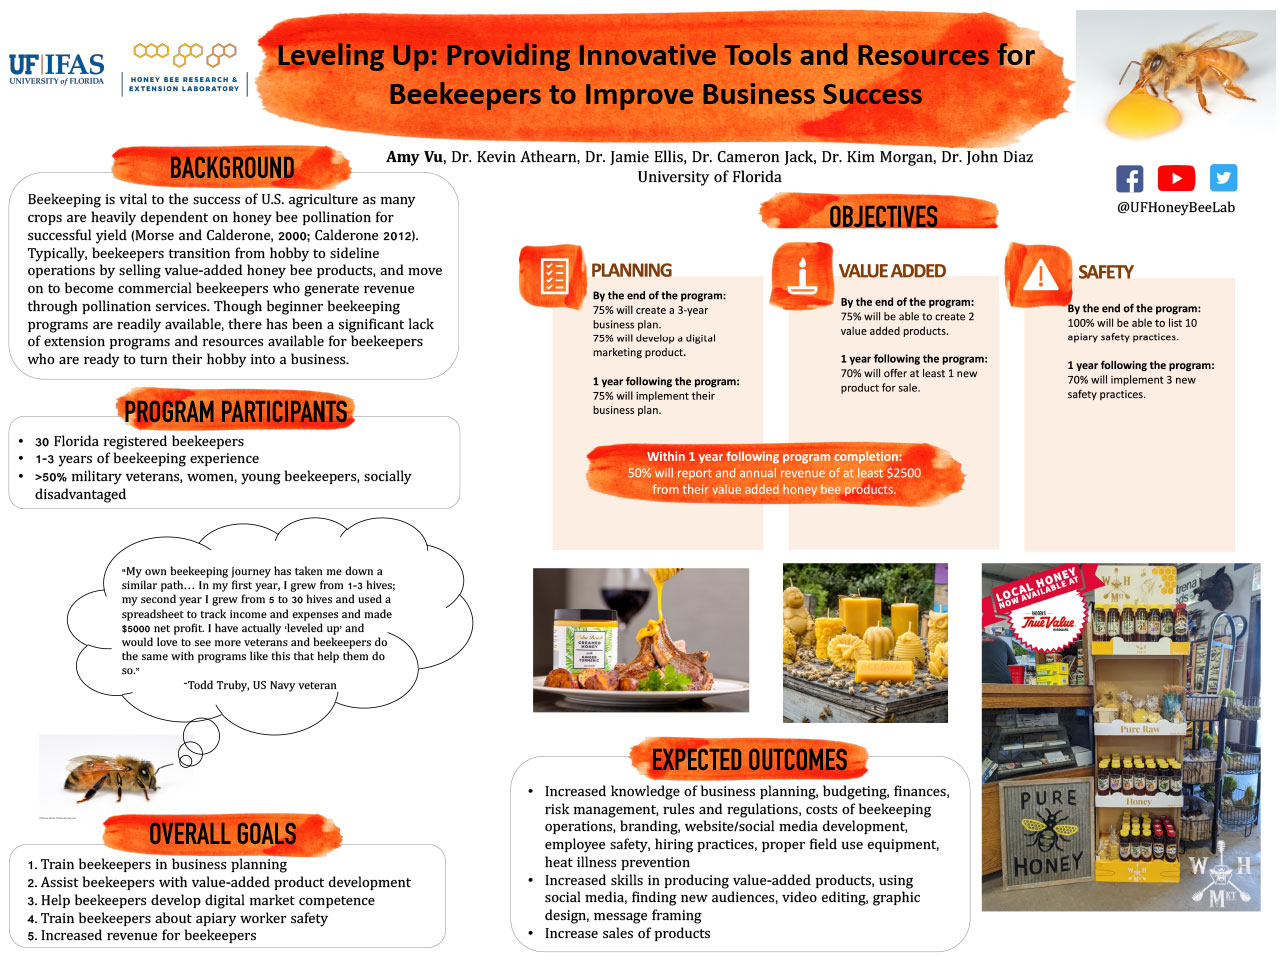 Leveling Up: Providing Innovative Tools and Resources for Beekeepers to Improve Business Success poster